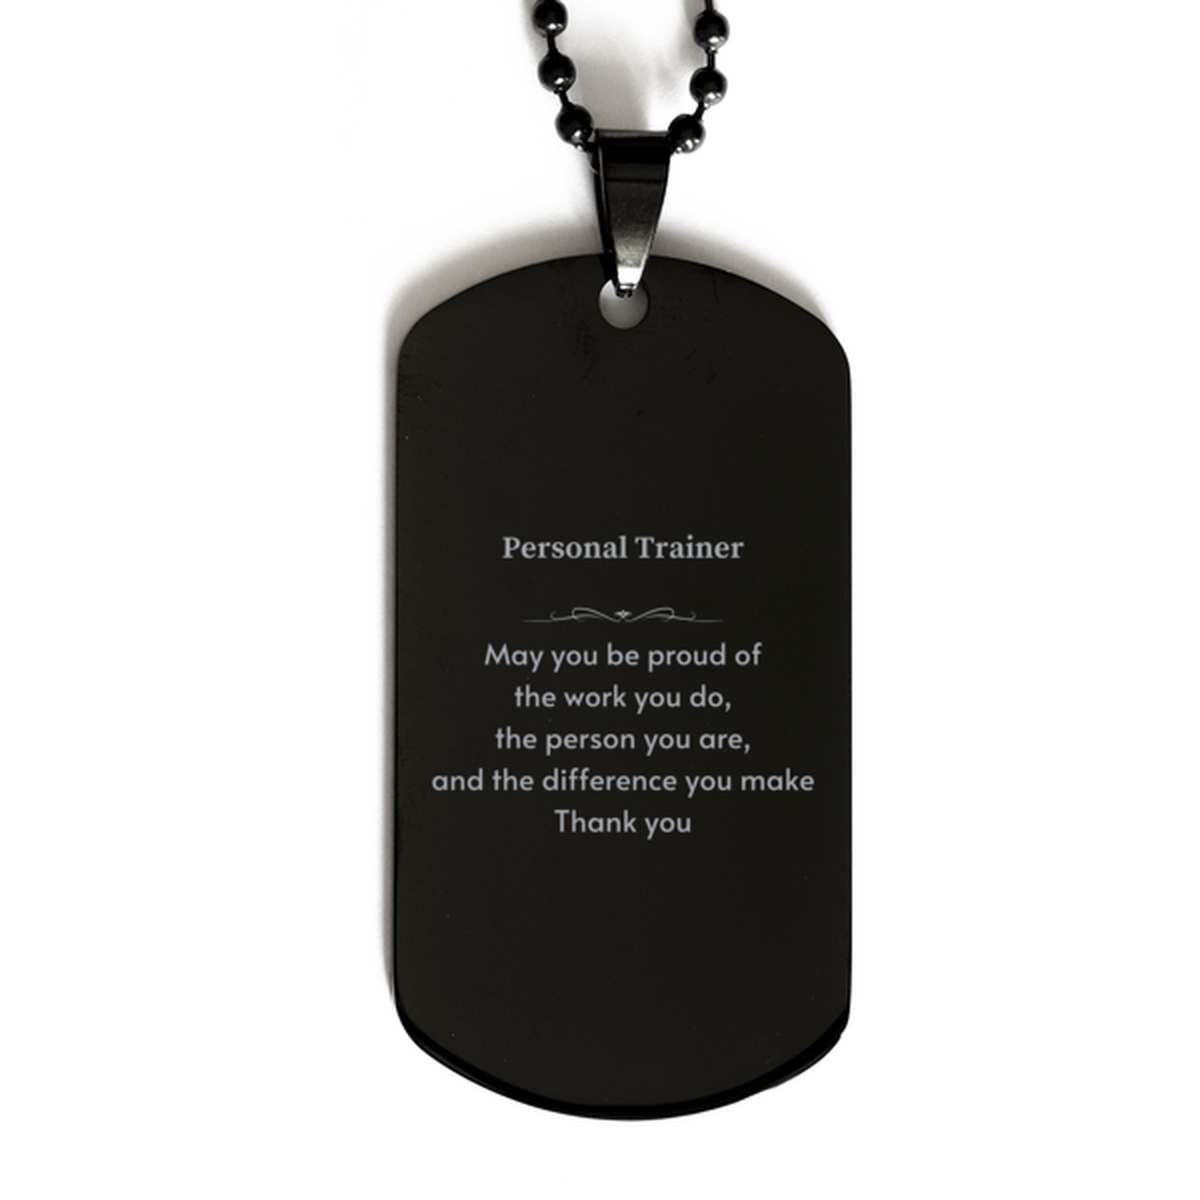 Heartwarming Black Dog Tag Retirement Coworkers Gifts for Personal Trainer, Personal Trainer May You be proud of the work you do, the person you are Gifts for Boss Men Women Friends